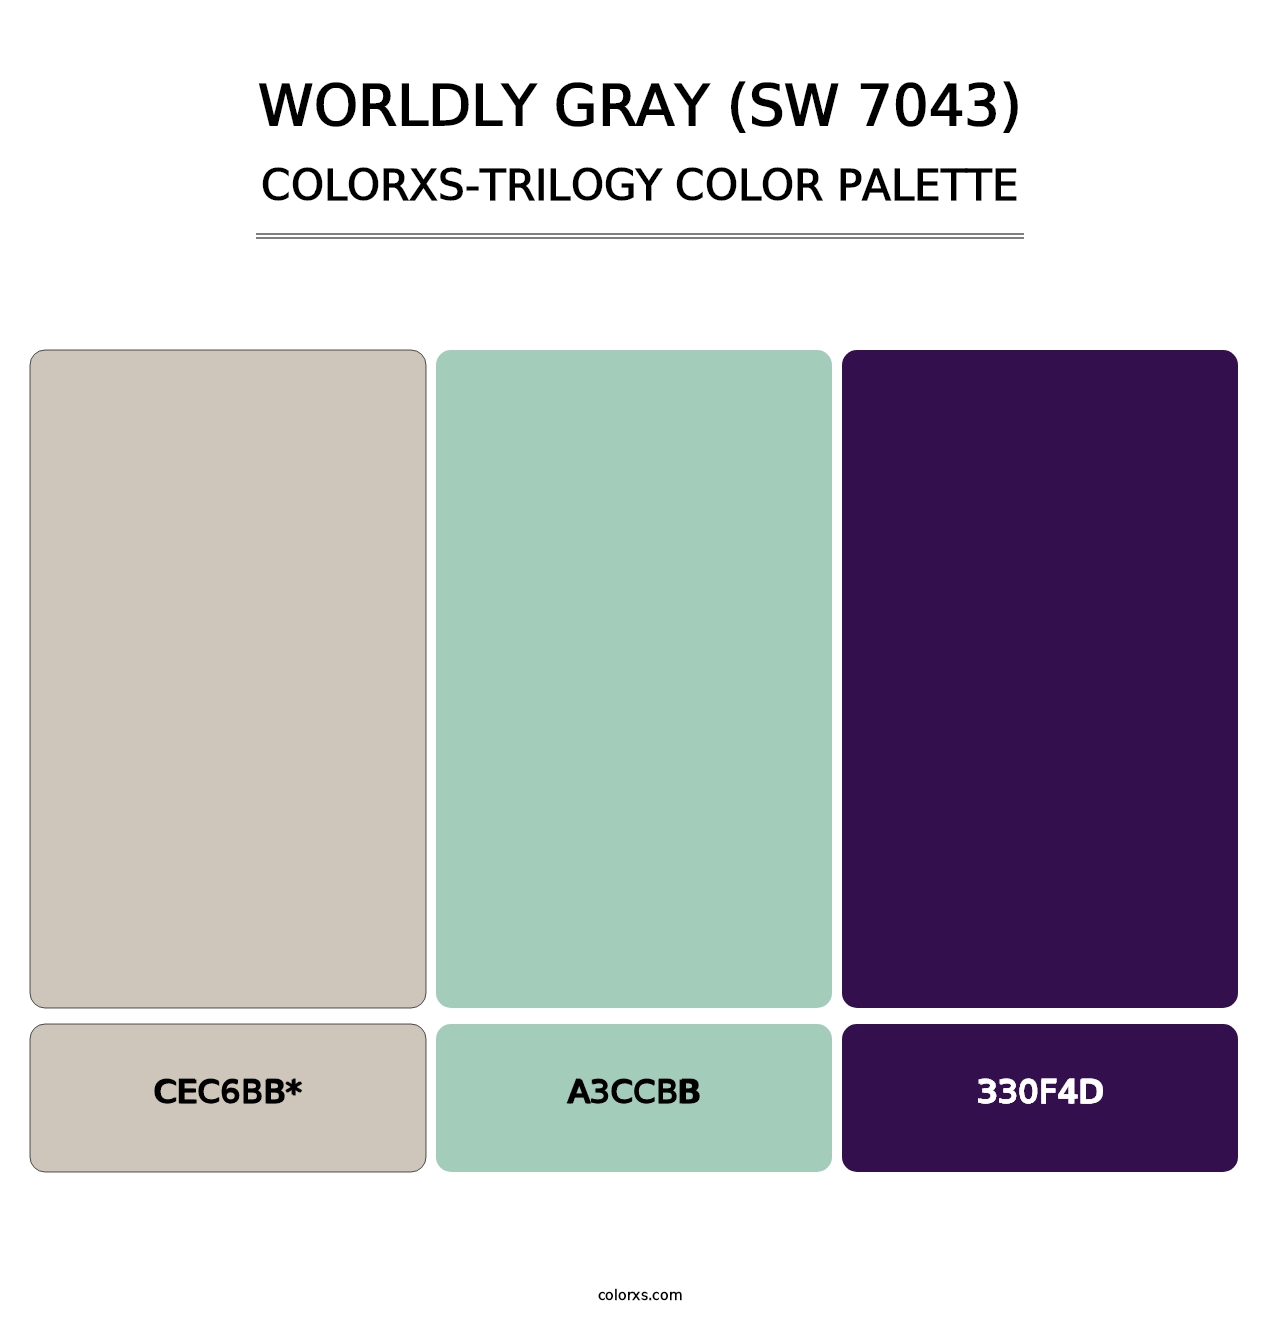 Worldly Gray (SW 7043) - Colorxs Trilogy Palette